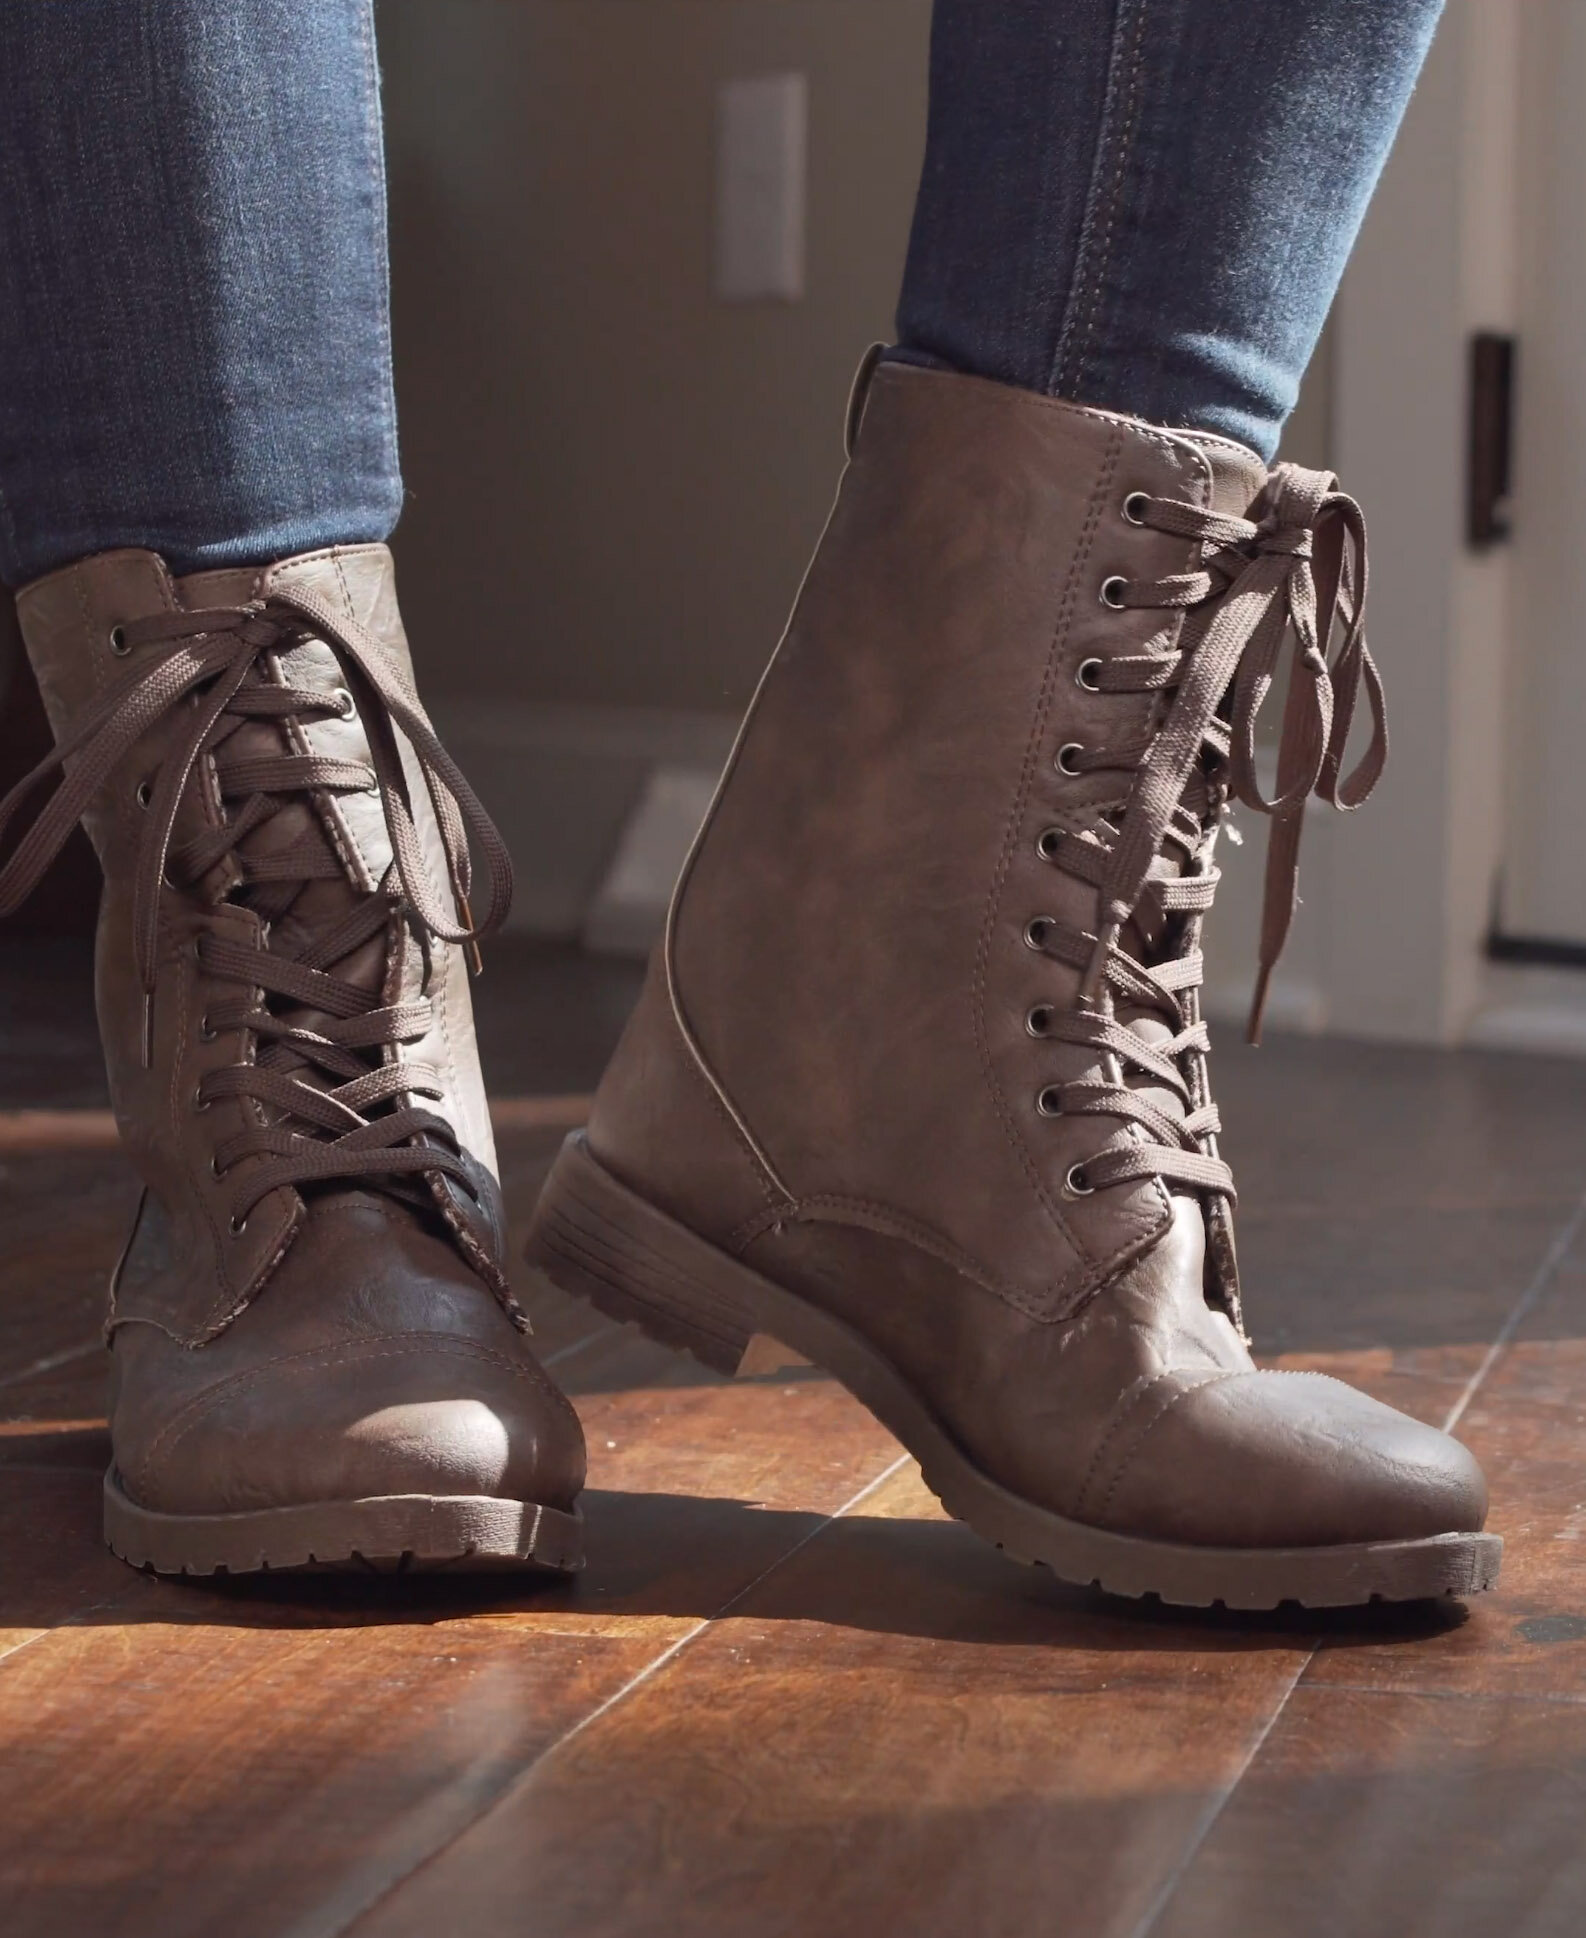 5 Must-Have Women's Boots for Fall – Glik's